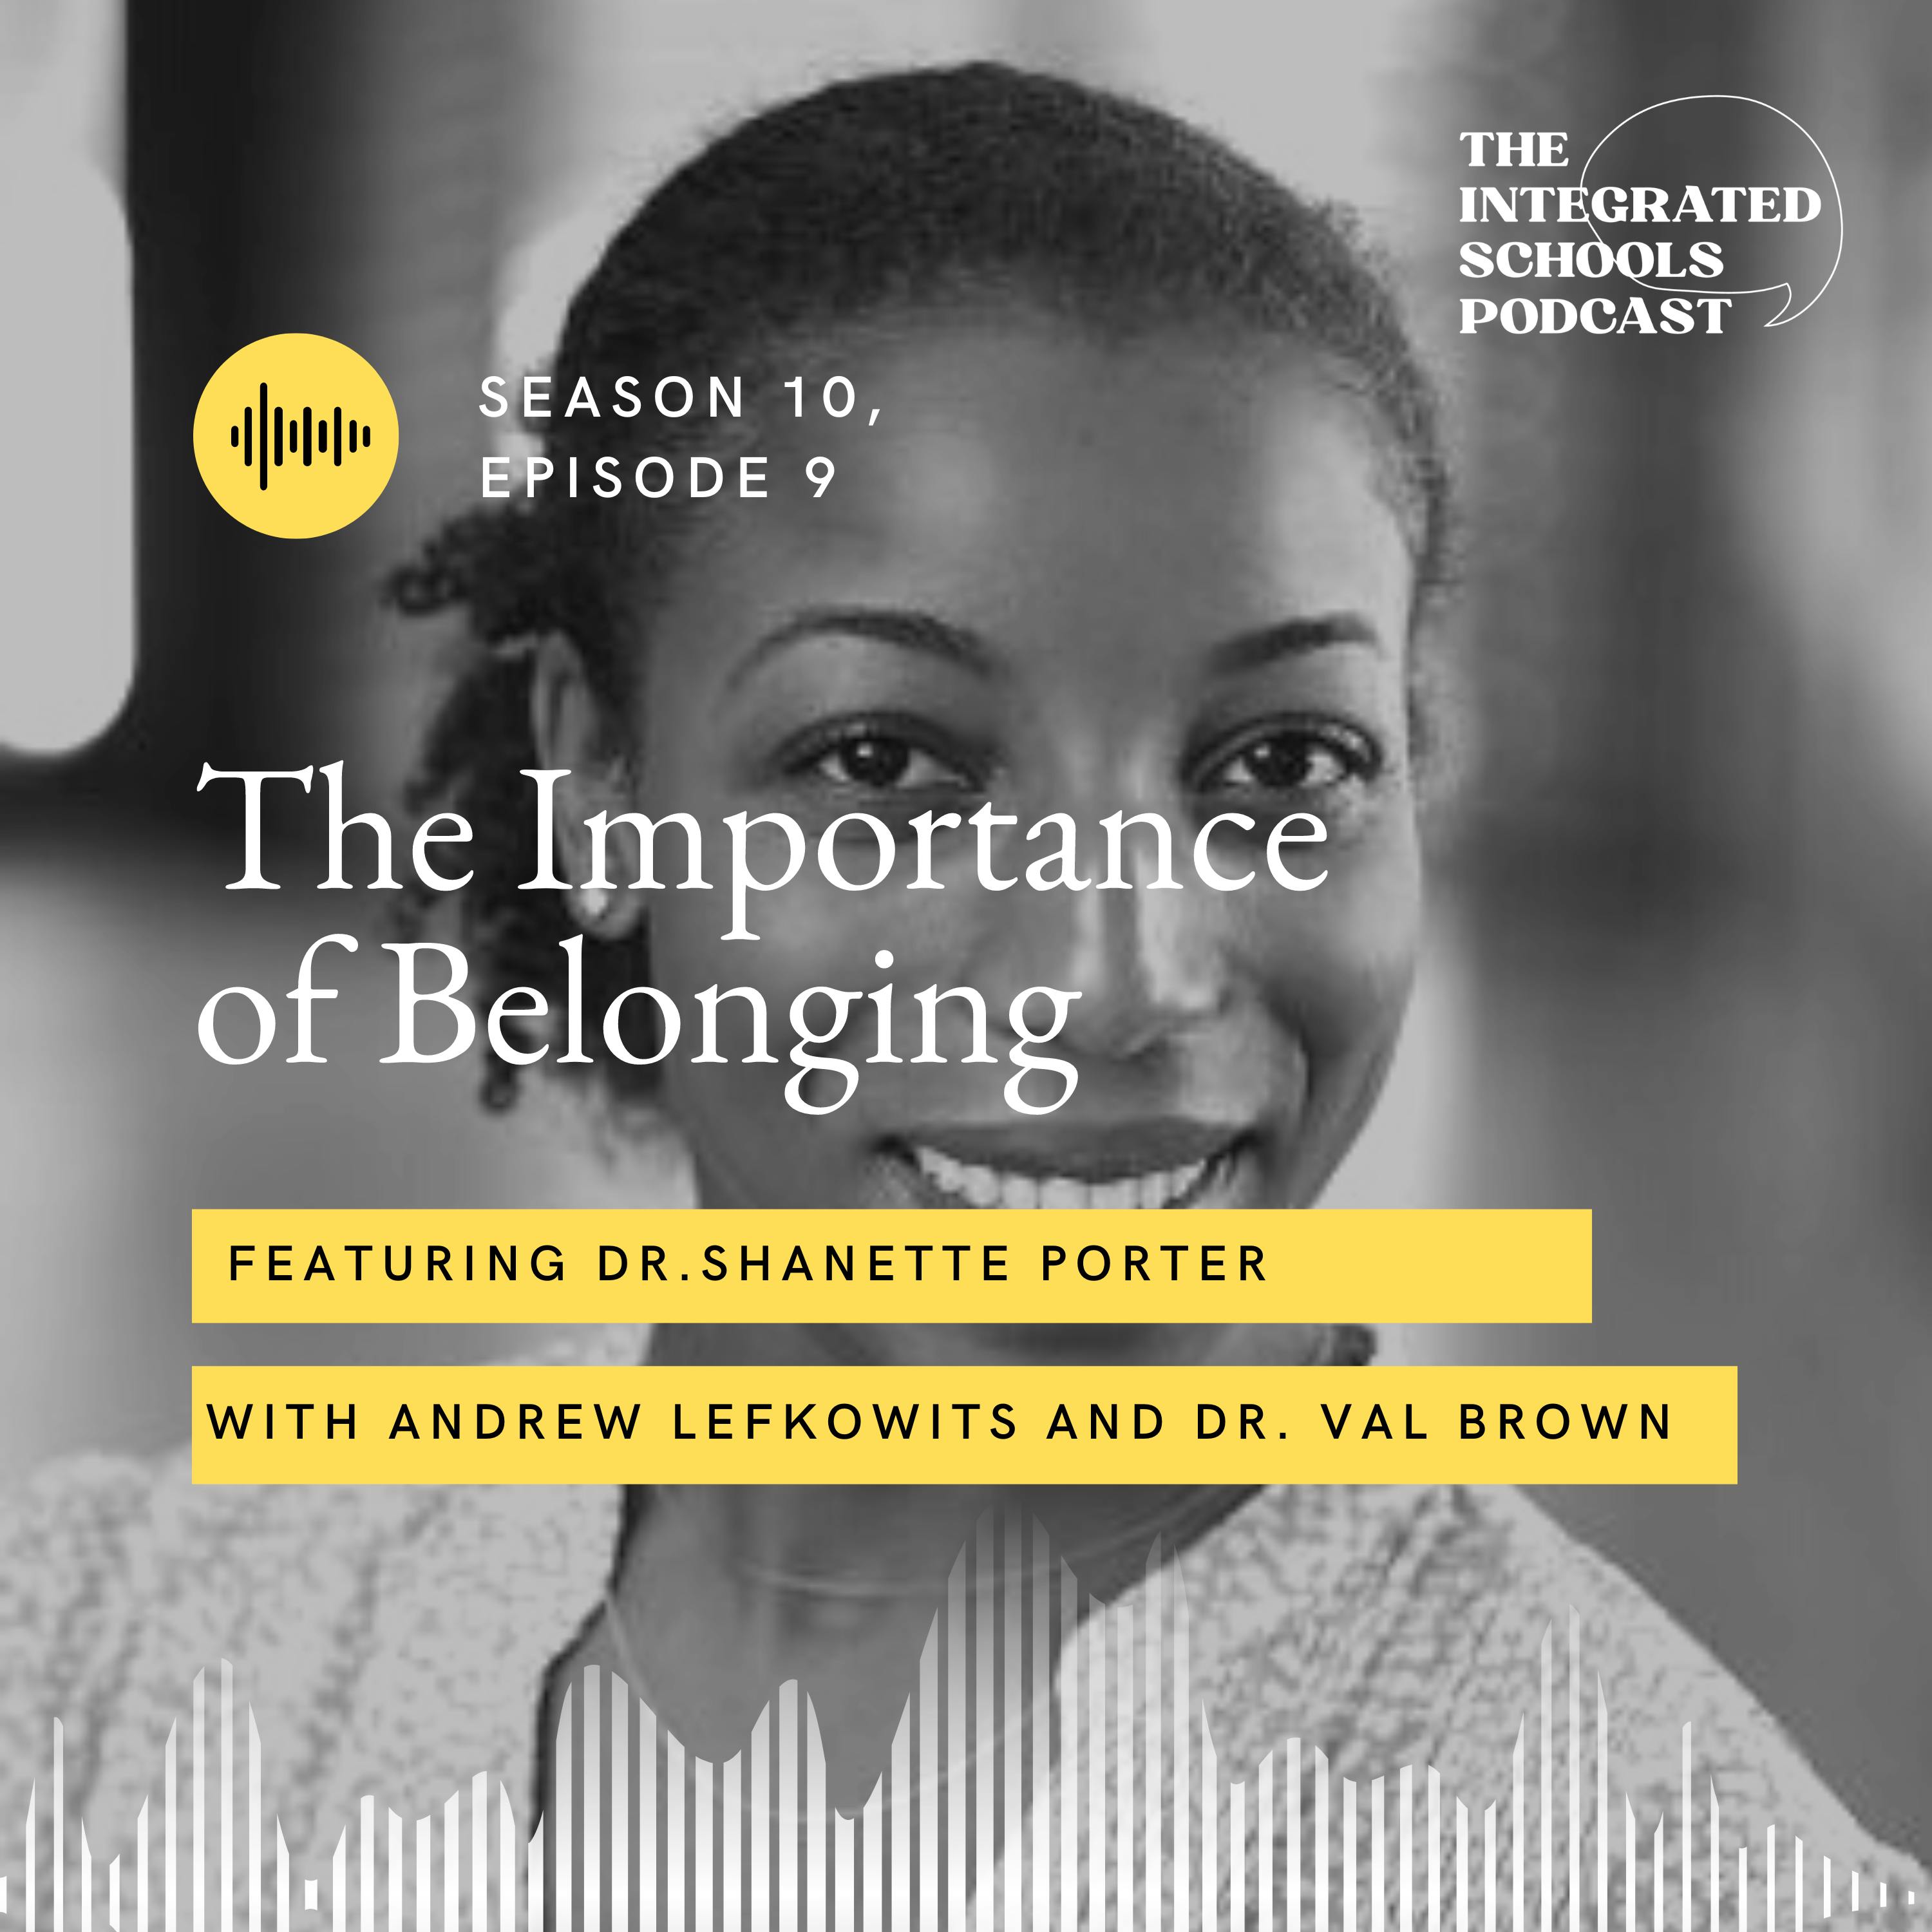 The Importance of Belonging